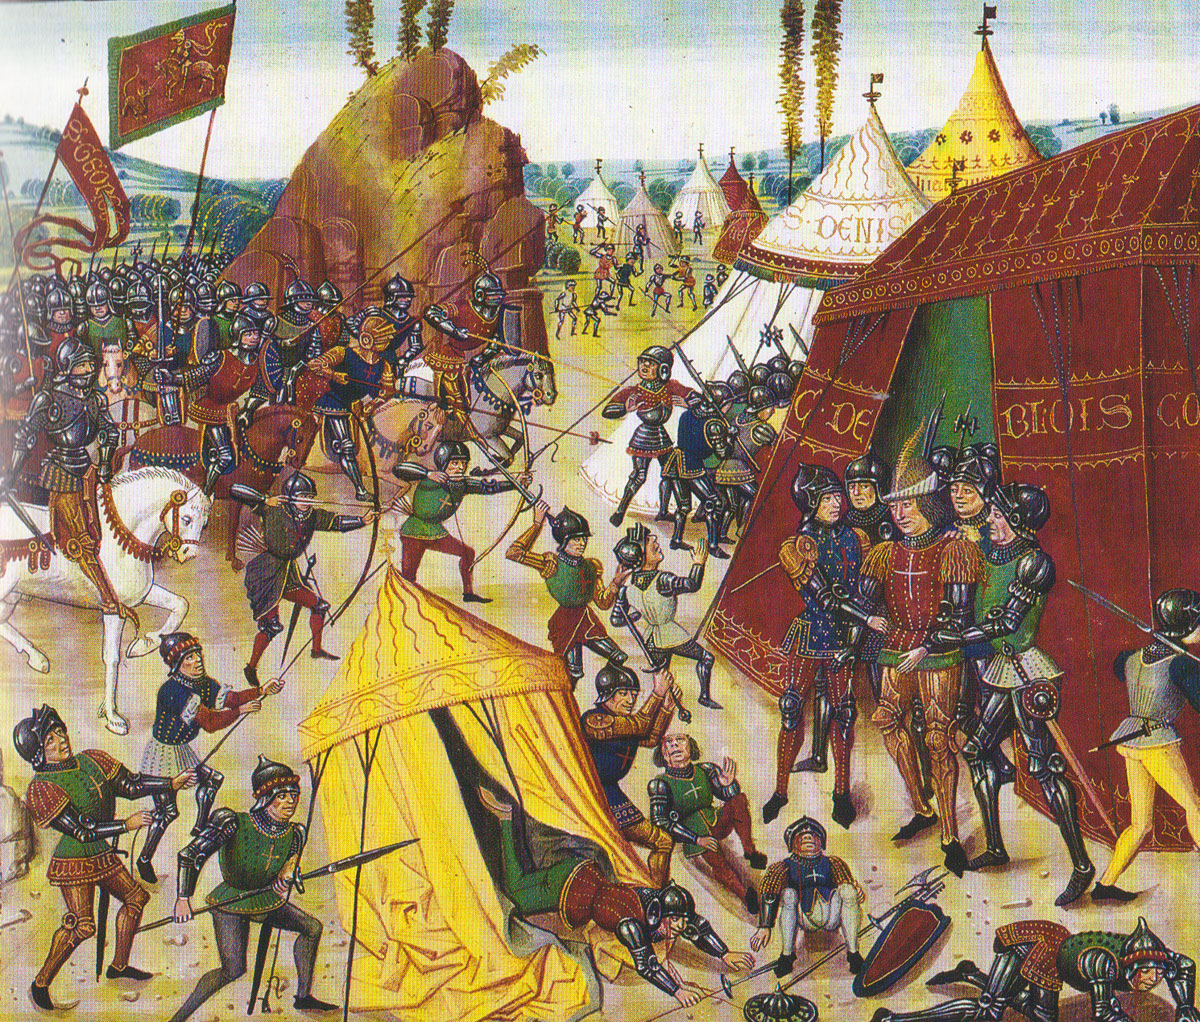 Battle of La Roche-Derrien on 20th June 1347 in the Hundred Years War showing the capture of Charles of Blois